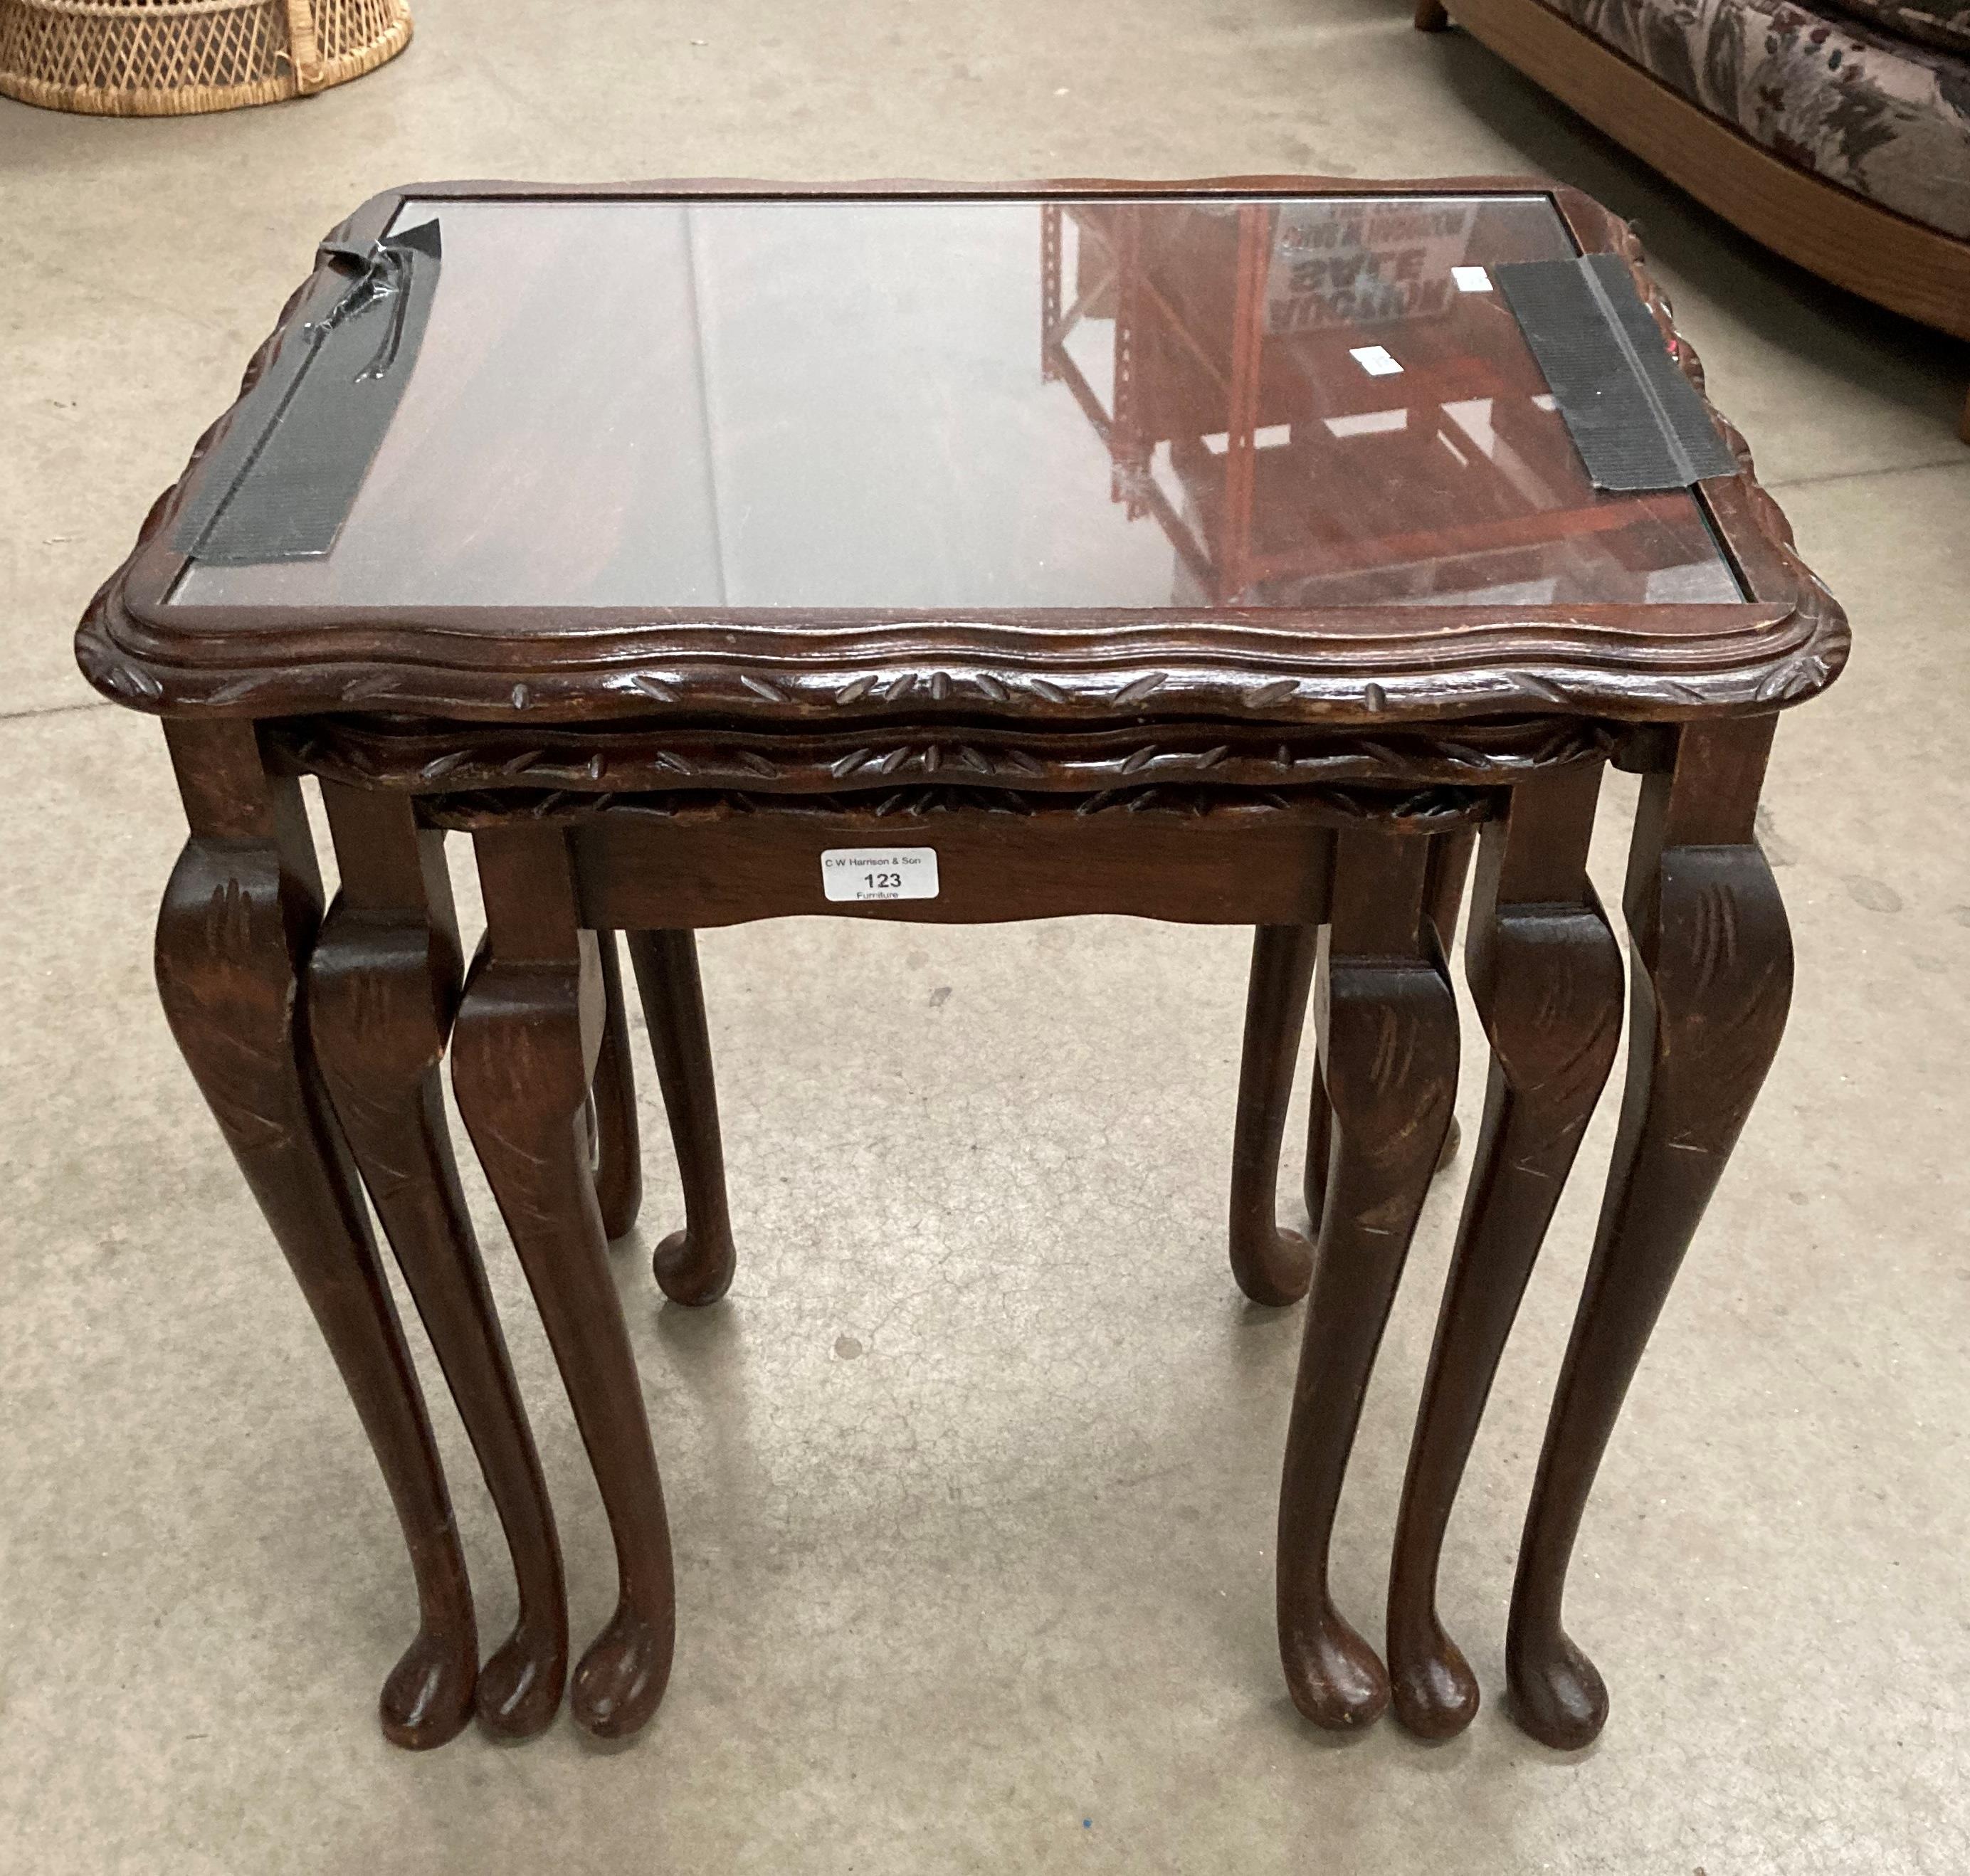 A nest of three mahogany coffee tables with glass inset tops - Image 2 of 2